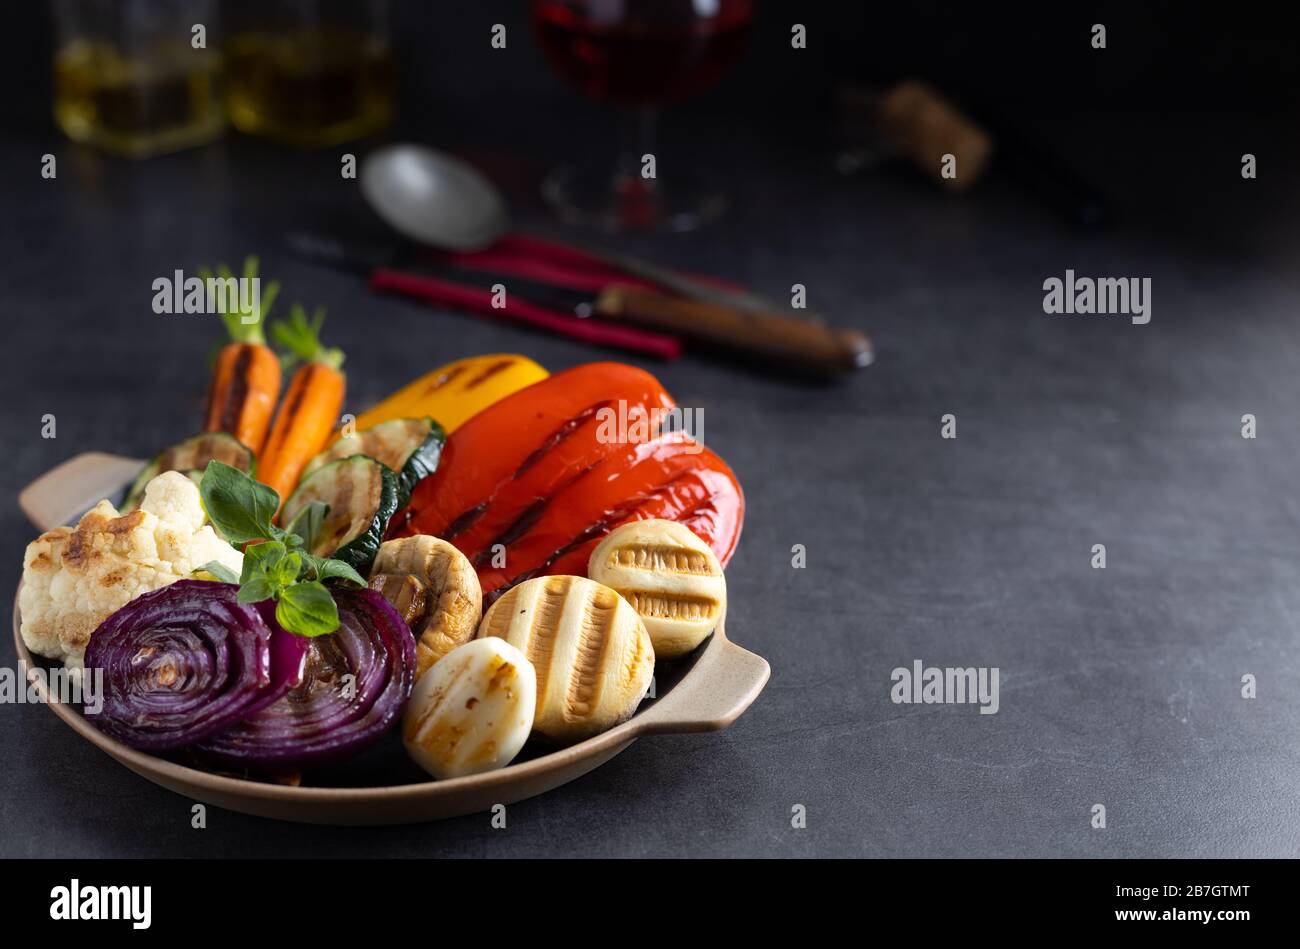 Organic grilled vegetables bell pepper, cauliflower,broccoli,carrots,mushrooms and red onions served on a round plate. Vegetarian dinner serving of ro Stock Photo